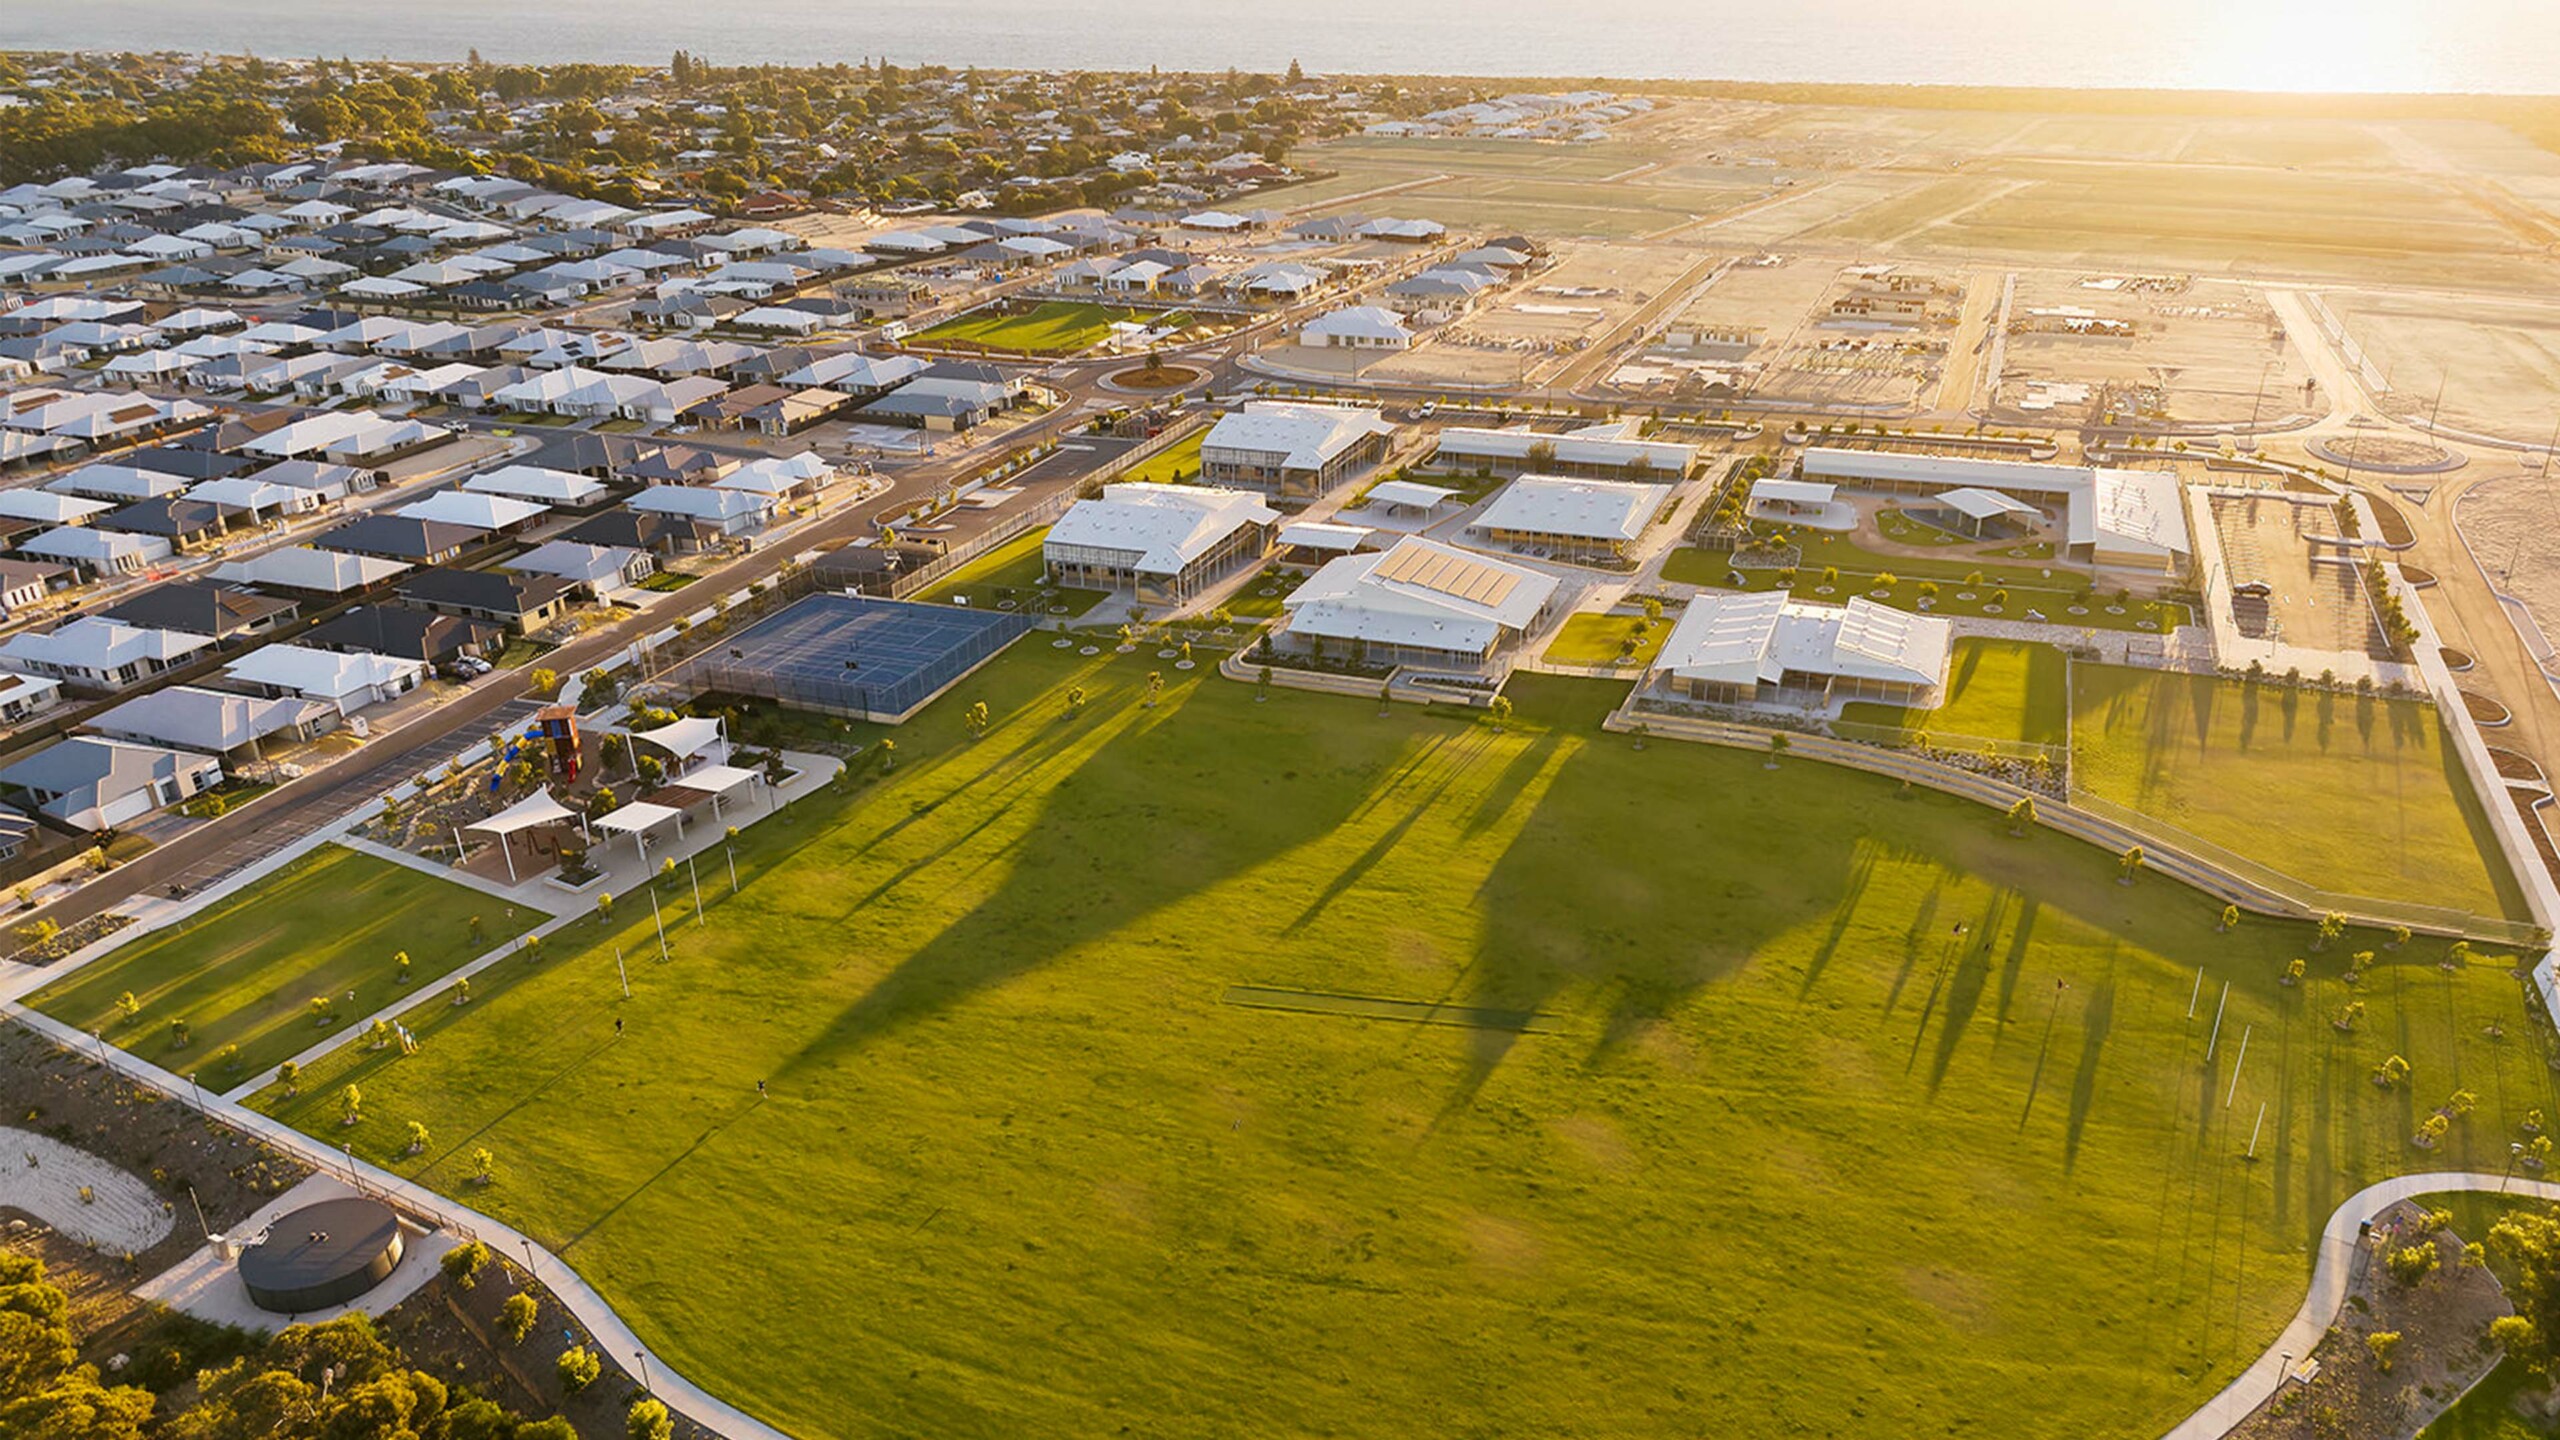 Seaside, Madora Bay primary school and oval